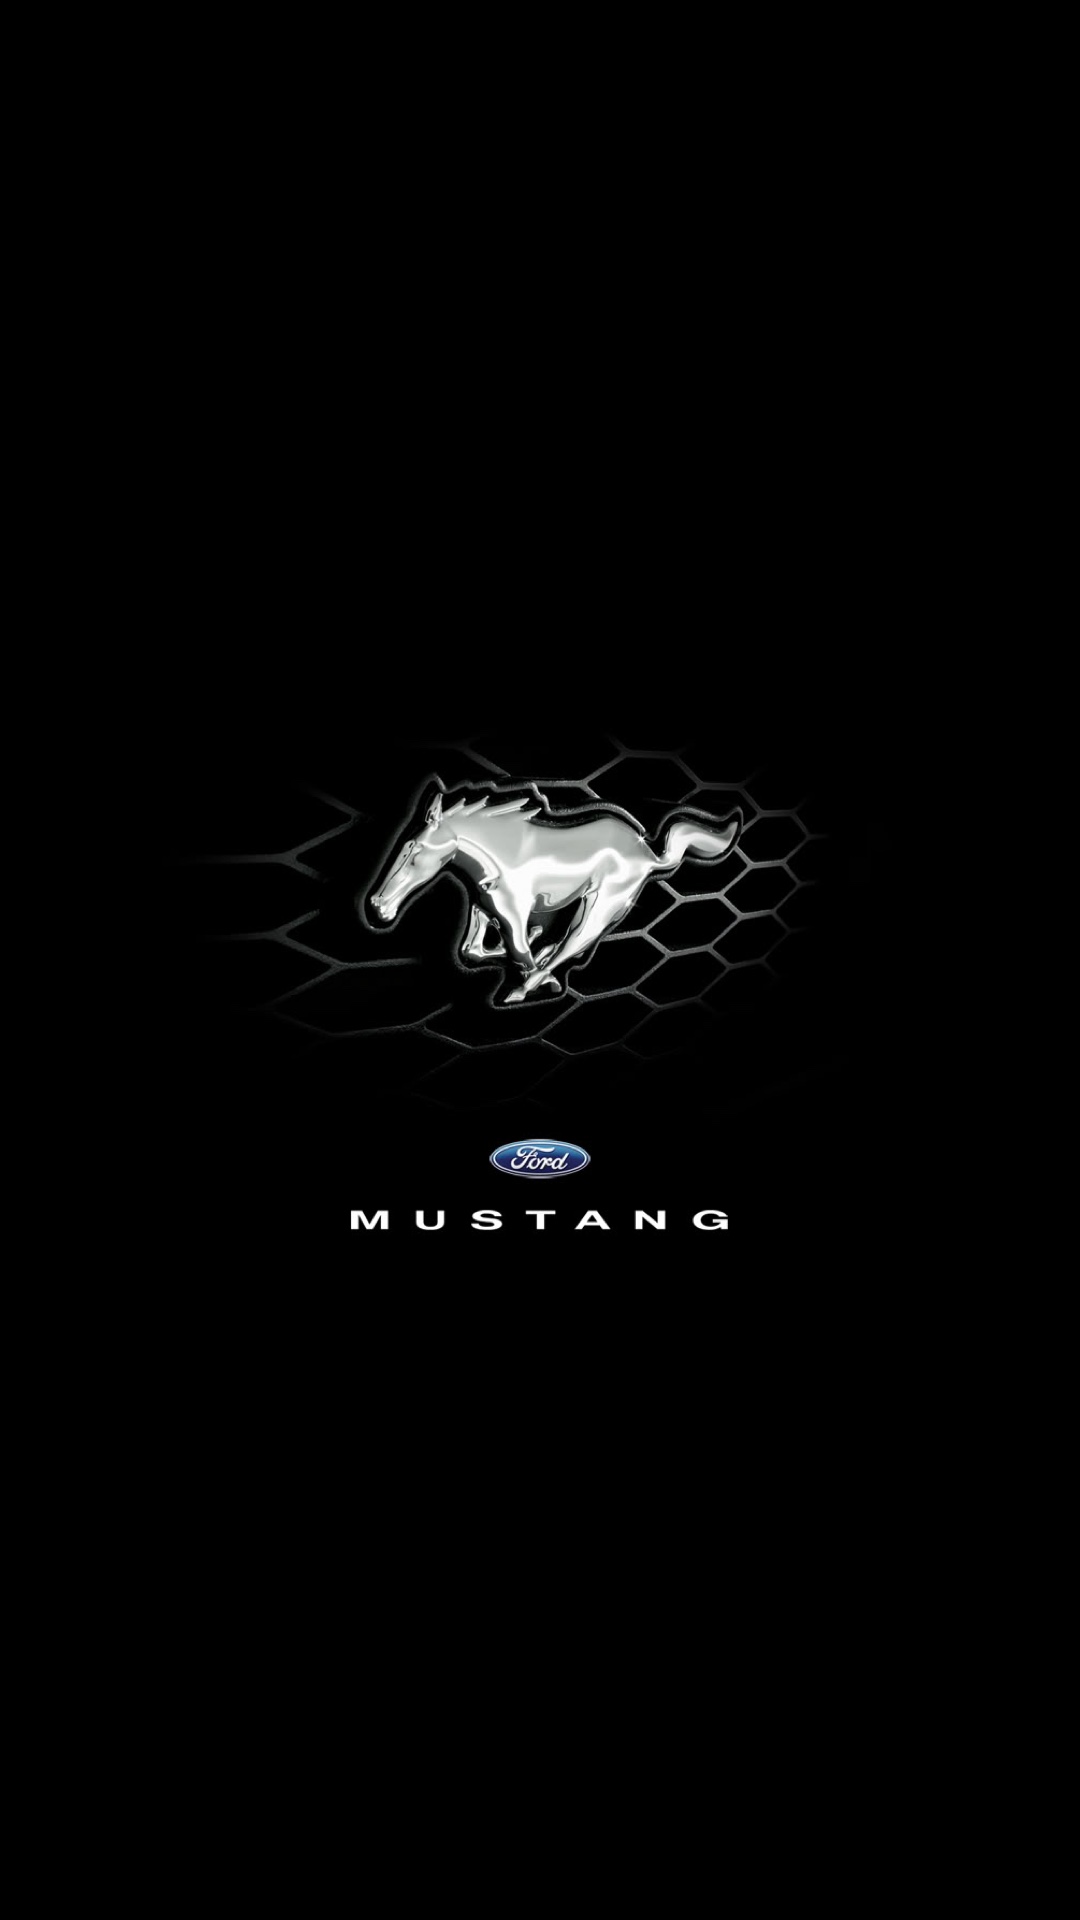 Mustang Logo Wallpaper HDq Image Collection